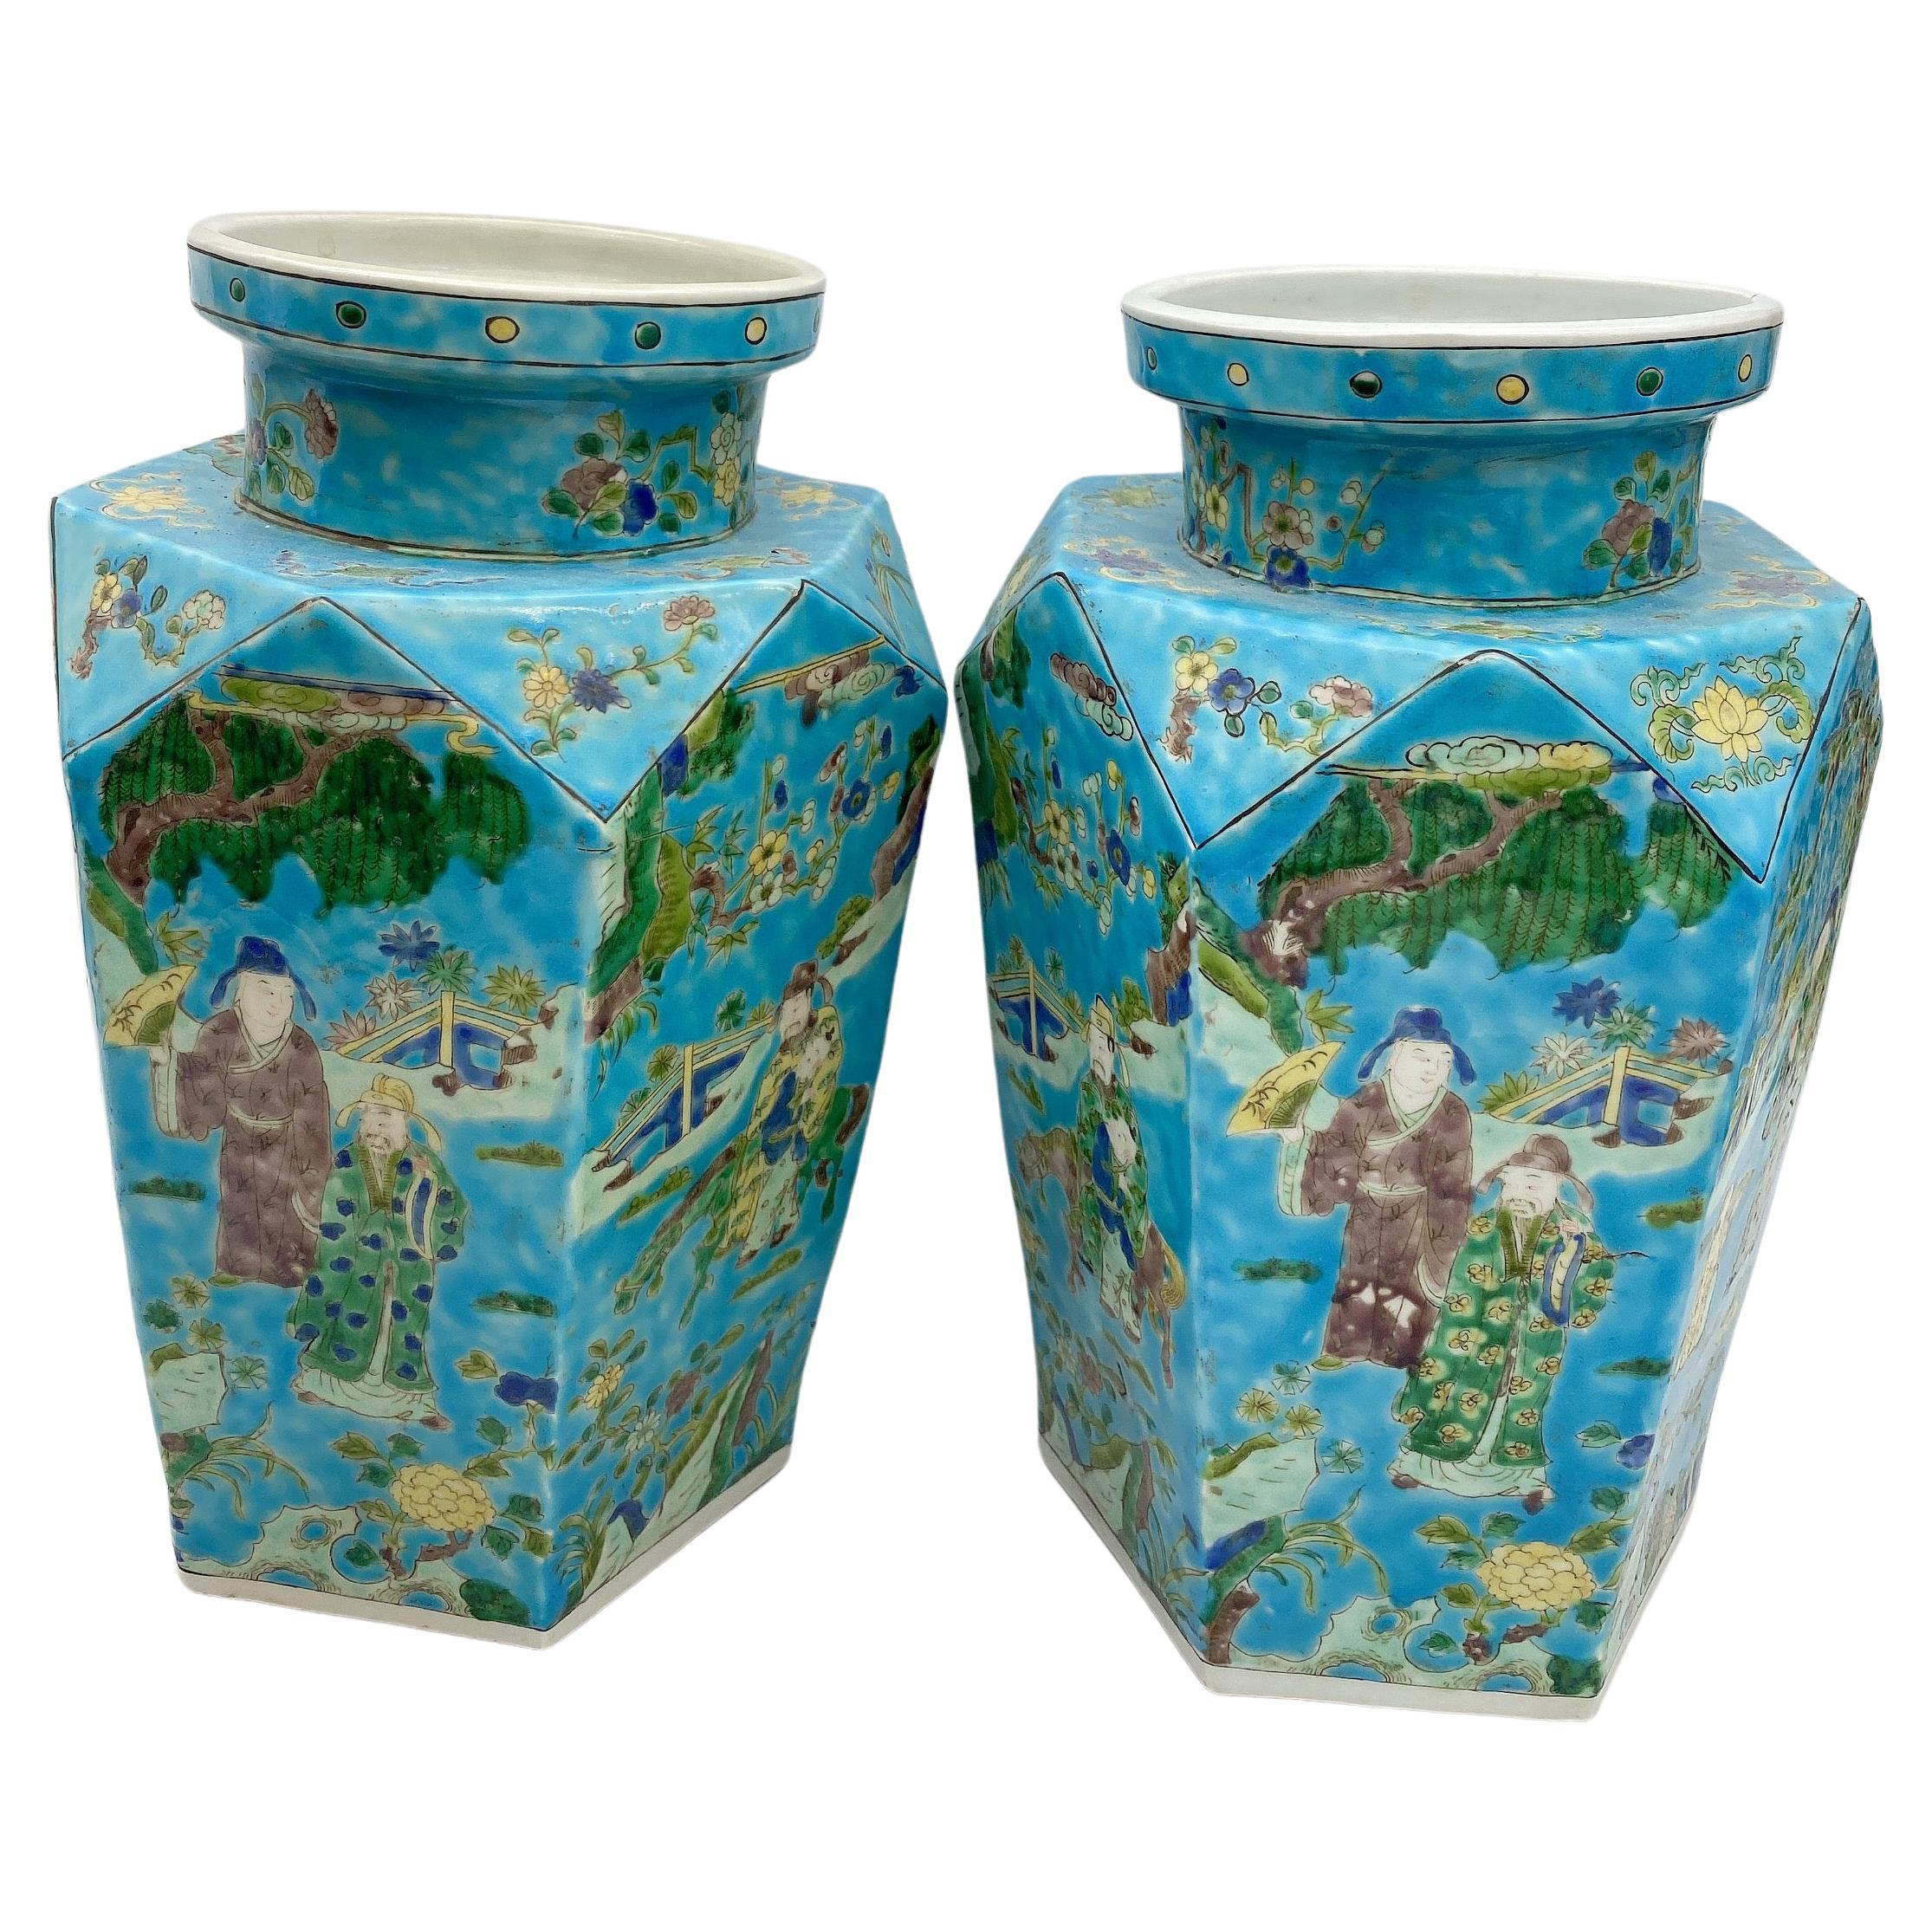 Antique Pair of Chinese Porcelain Vases For Sale